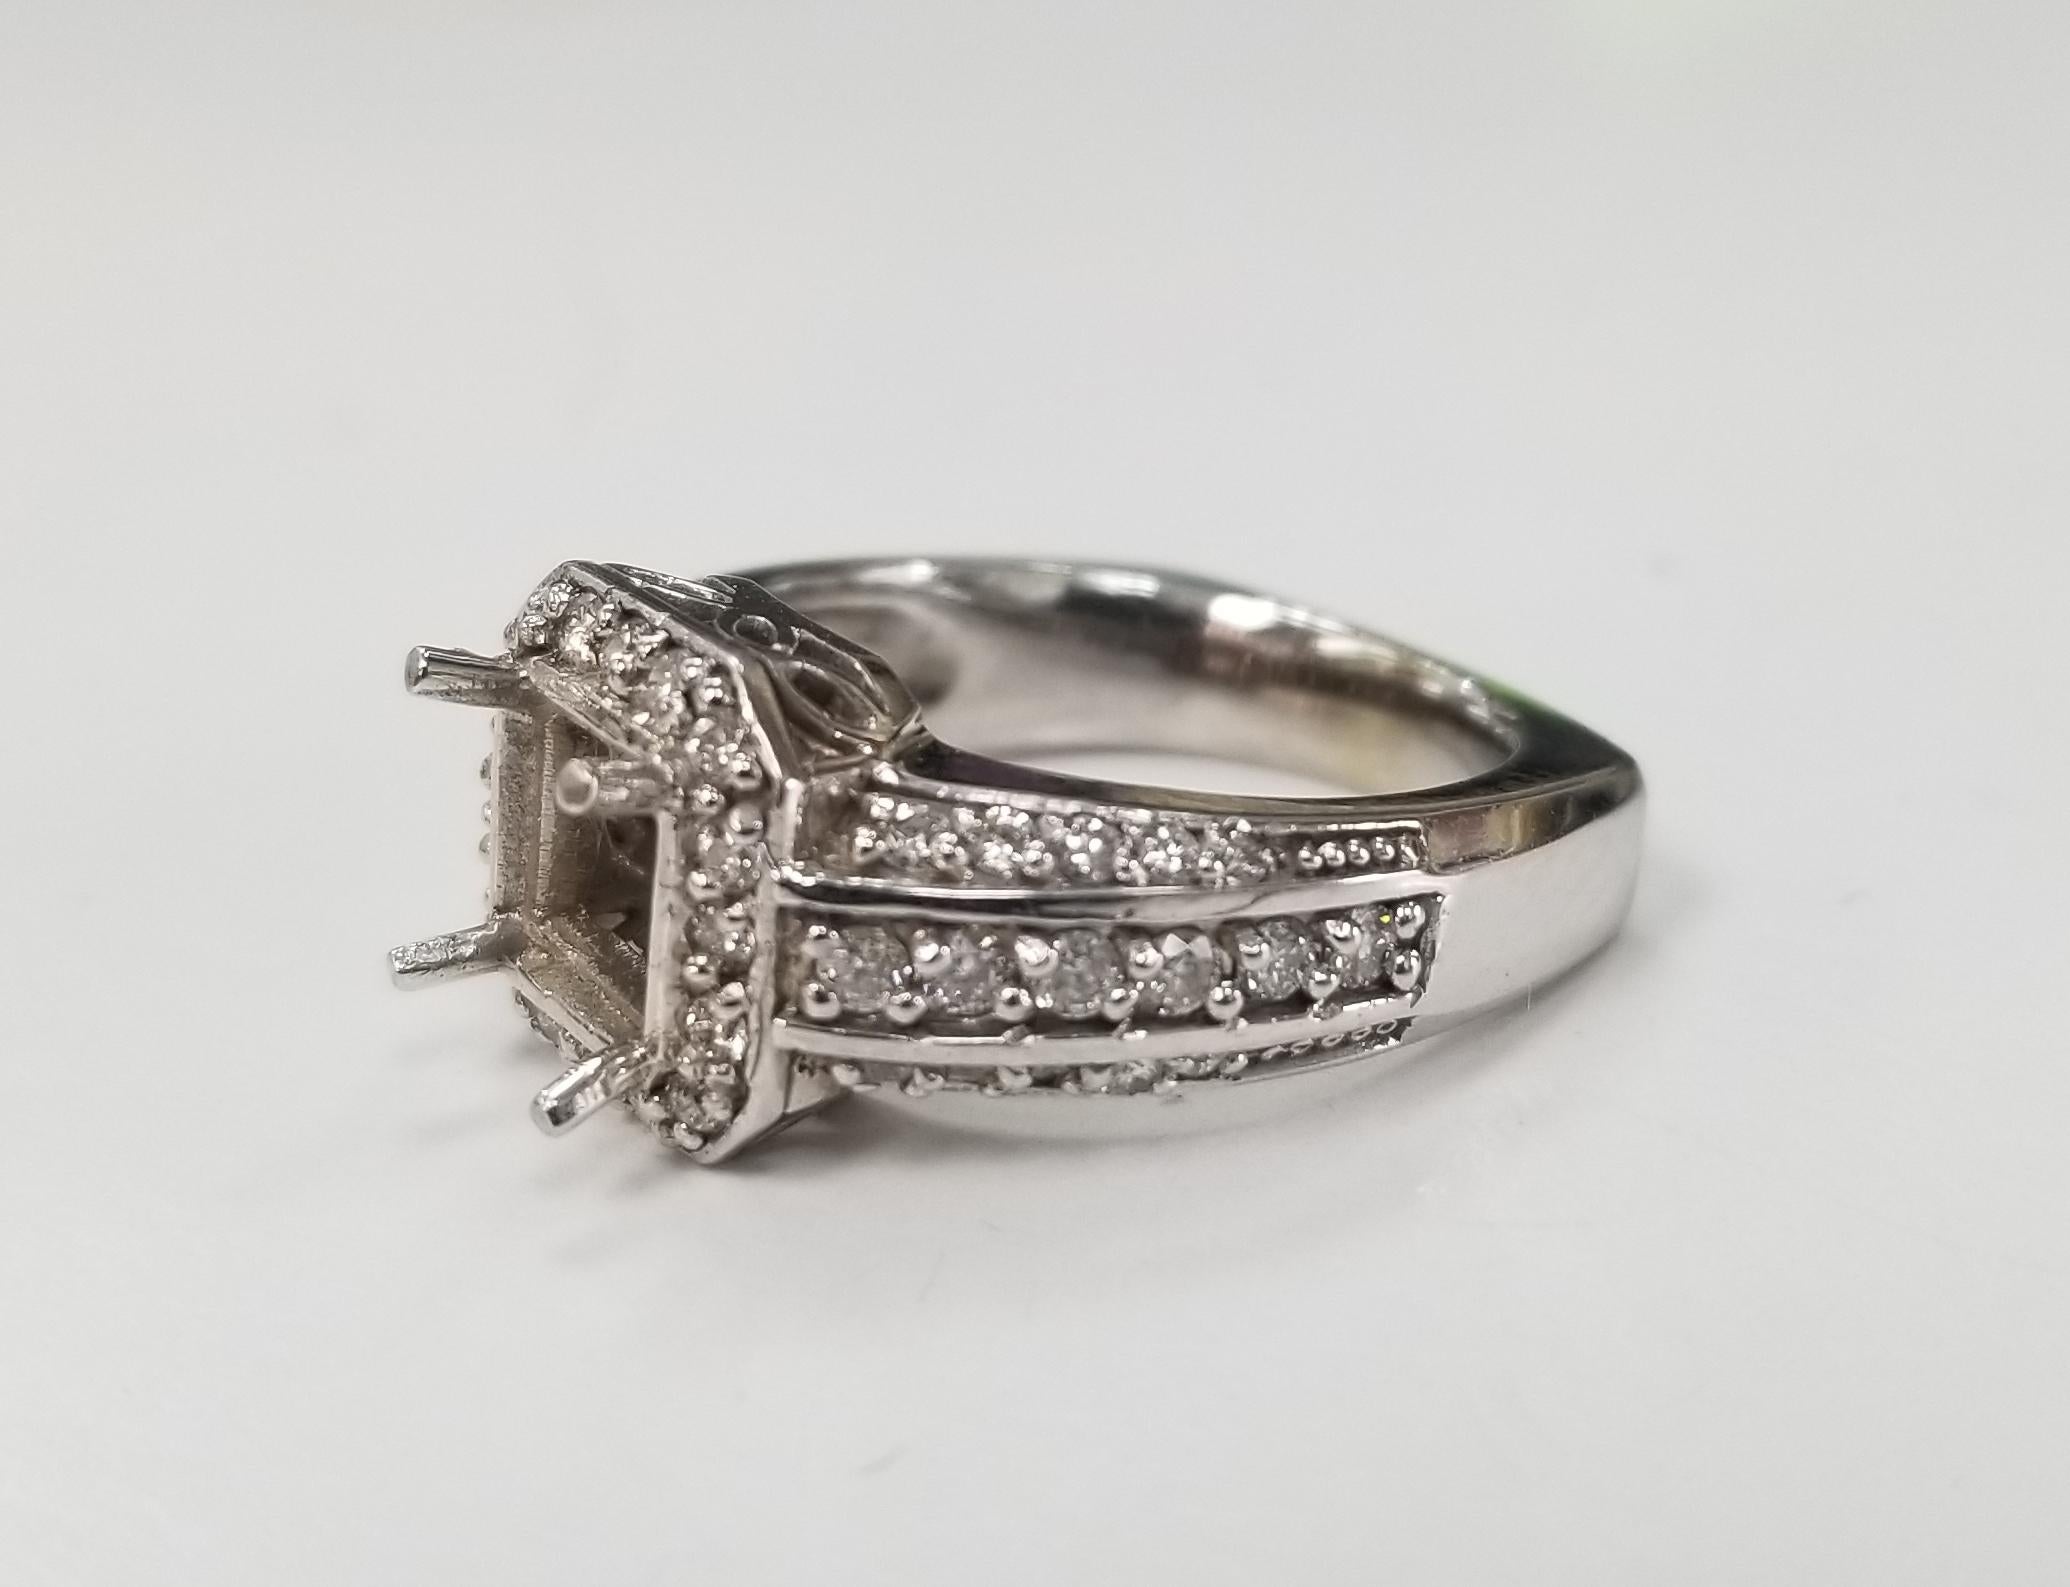 Art Deco inspired  14k with diamonds ring semi mount, containing  diamonds weighing diamonds 48round .75pts.,  the ring is a size 6 and can be sized to fit for free. the ring can take 6mm x 6mm stone.